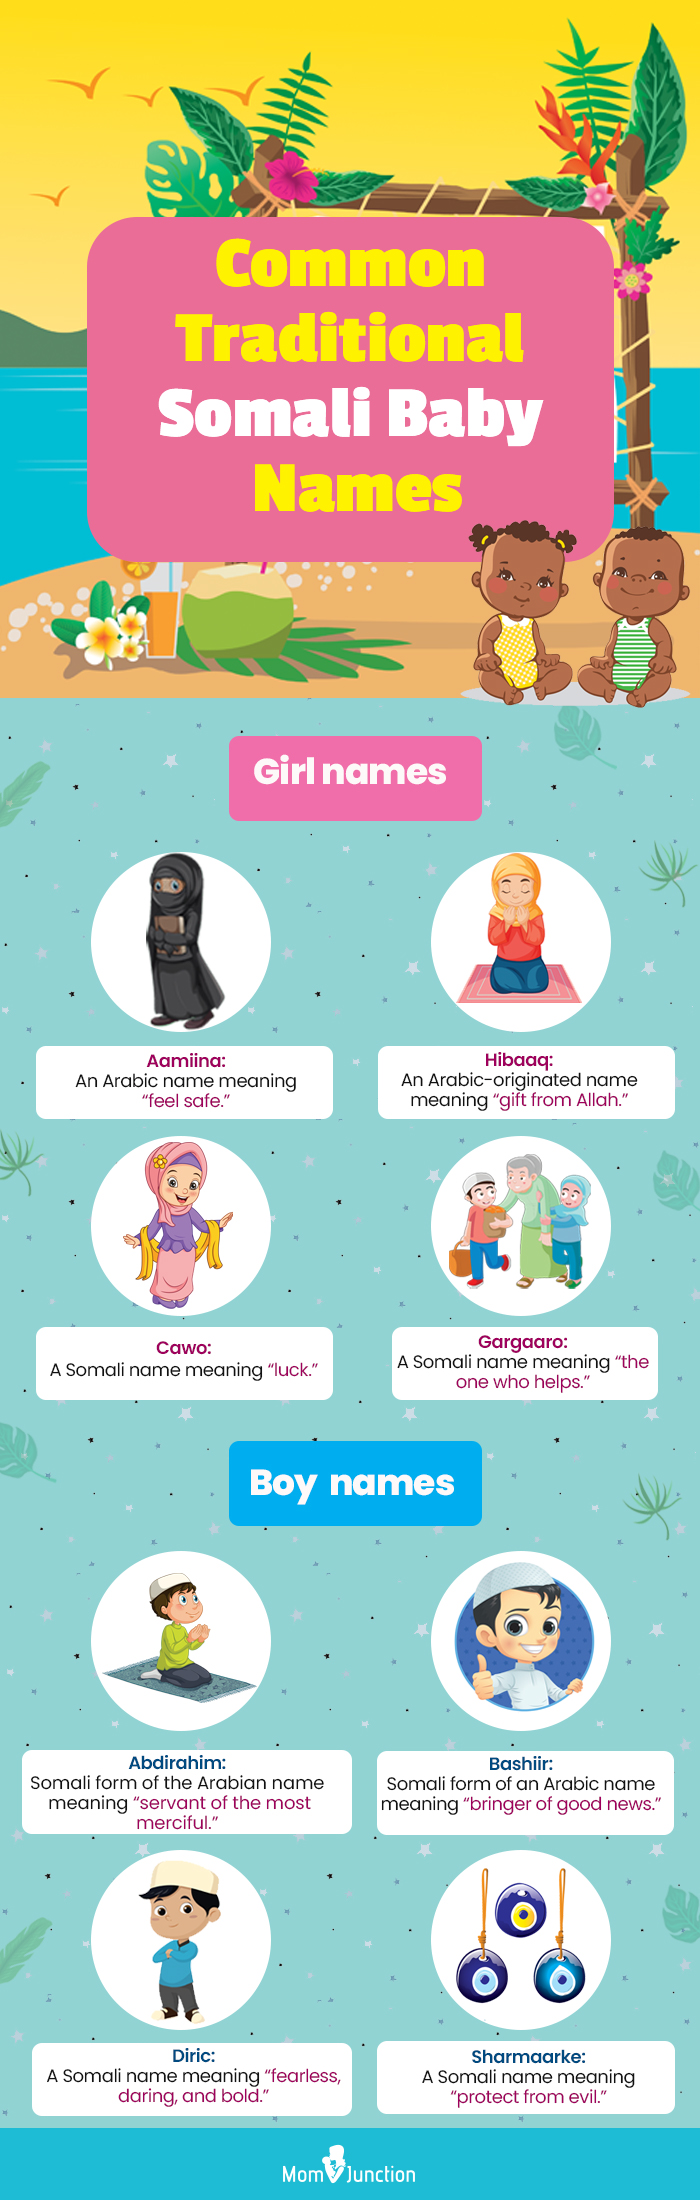 common traditional somali baby names (infographic)